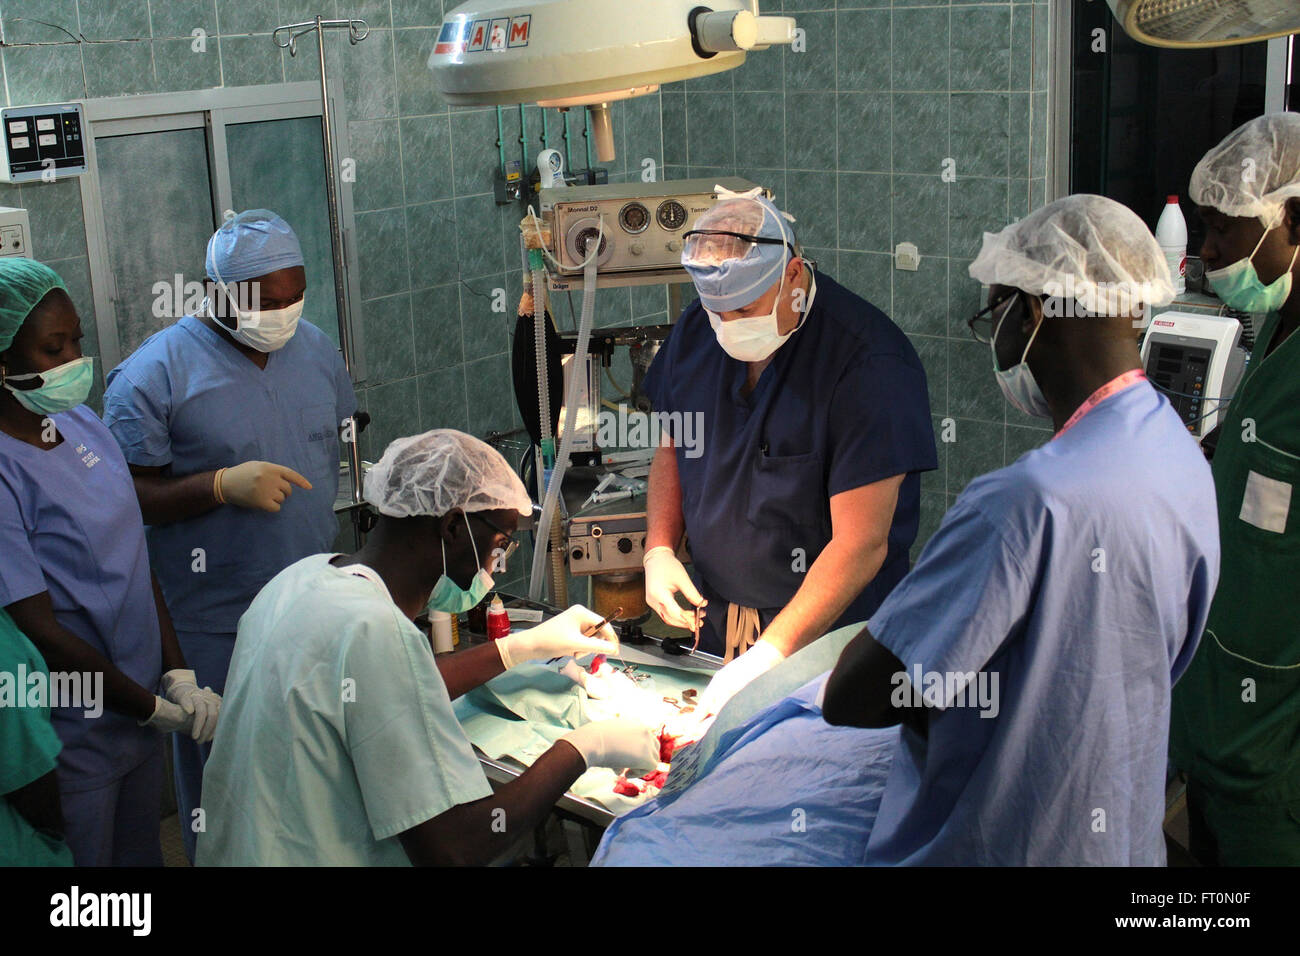 General surgeons U.S. Army Lt. Col. Charles Boggs, of 345th Combat Support Hospital, and Senegalese Defense Force Maj. Diop Balla, of Hopital Militaire de Ouakam, perform surgery on a patient to fix a hernia in Dakar, Senegal, Jan. 25, 2016.  Boggs and other members of the U.S. Army Reserve are in partnership with the SDF to conduct a U.S. Army Africa Medical Readiness Training Exercise, from Jan. 18-29. This exercise is the first of many scheduled throughout the year to demonstrate the strong partnership the U.S. has with its African partners.  (U.S. Army photo by Capt. Charles An) Stock Photo